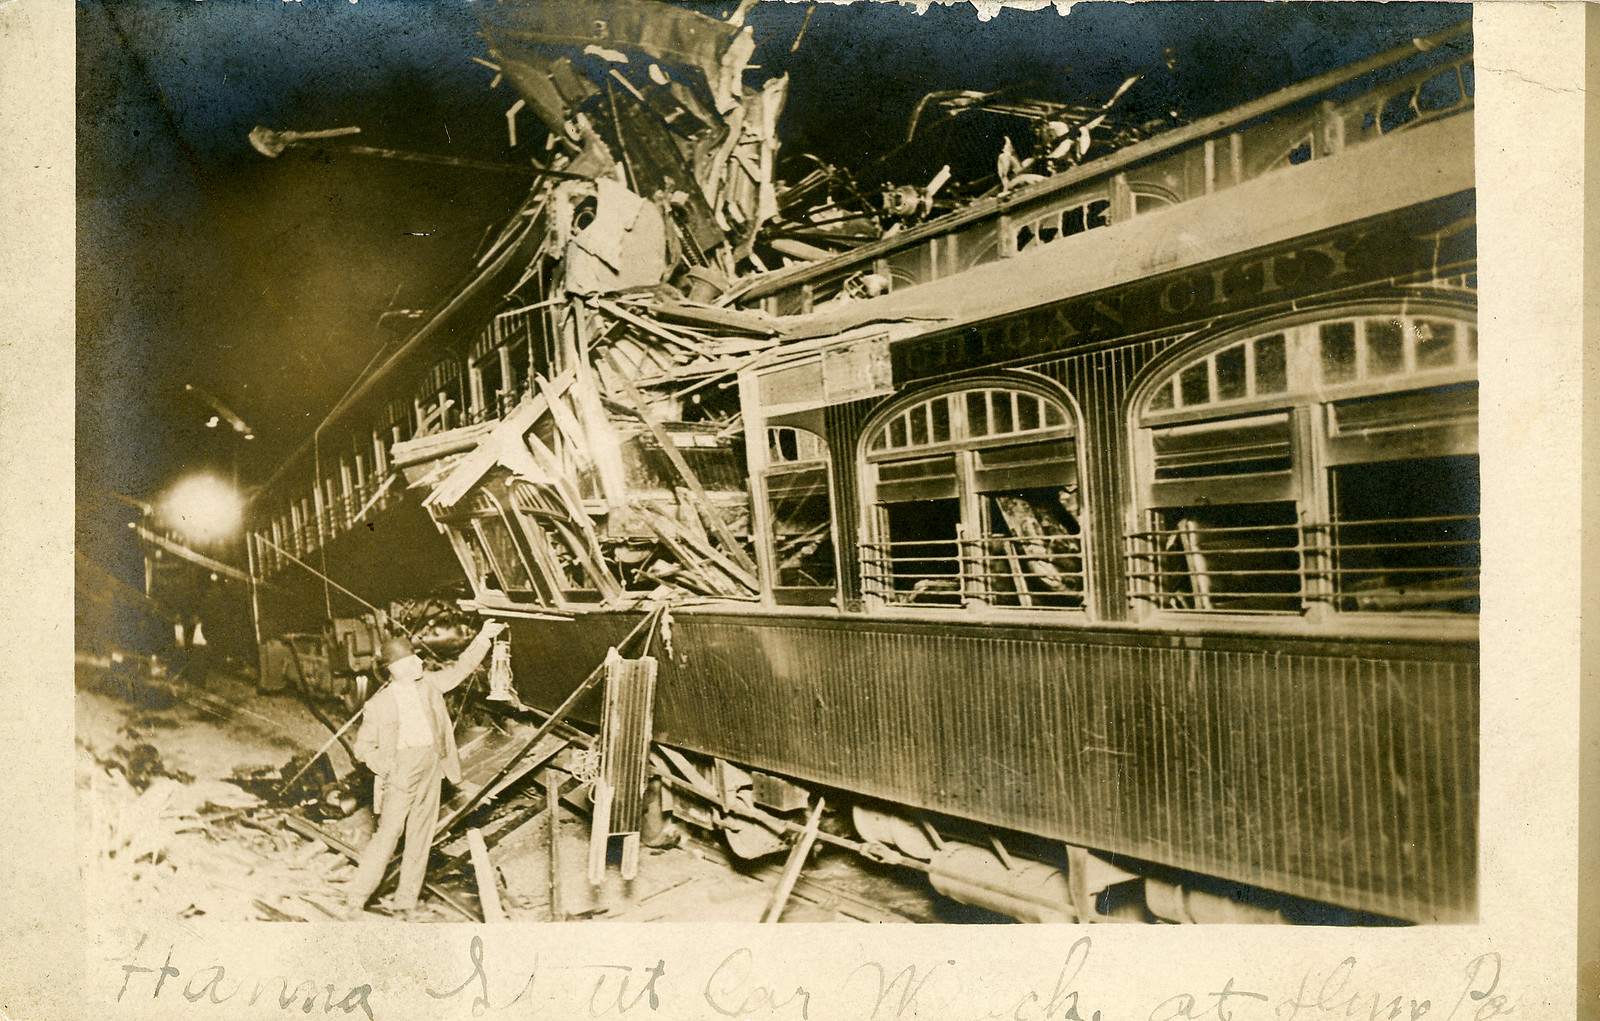 Chicago, Lake Shore & South Bend Railway Wreck, June 19, 1909 - Porter, Indiana